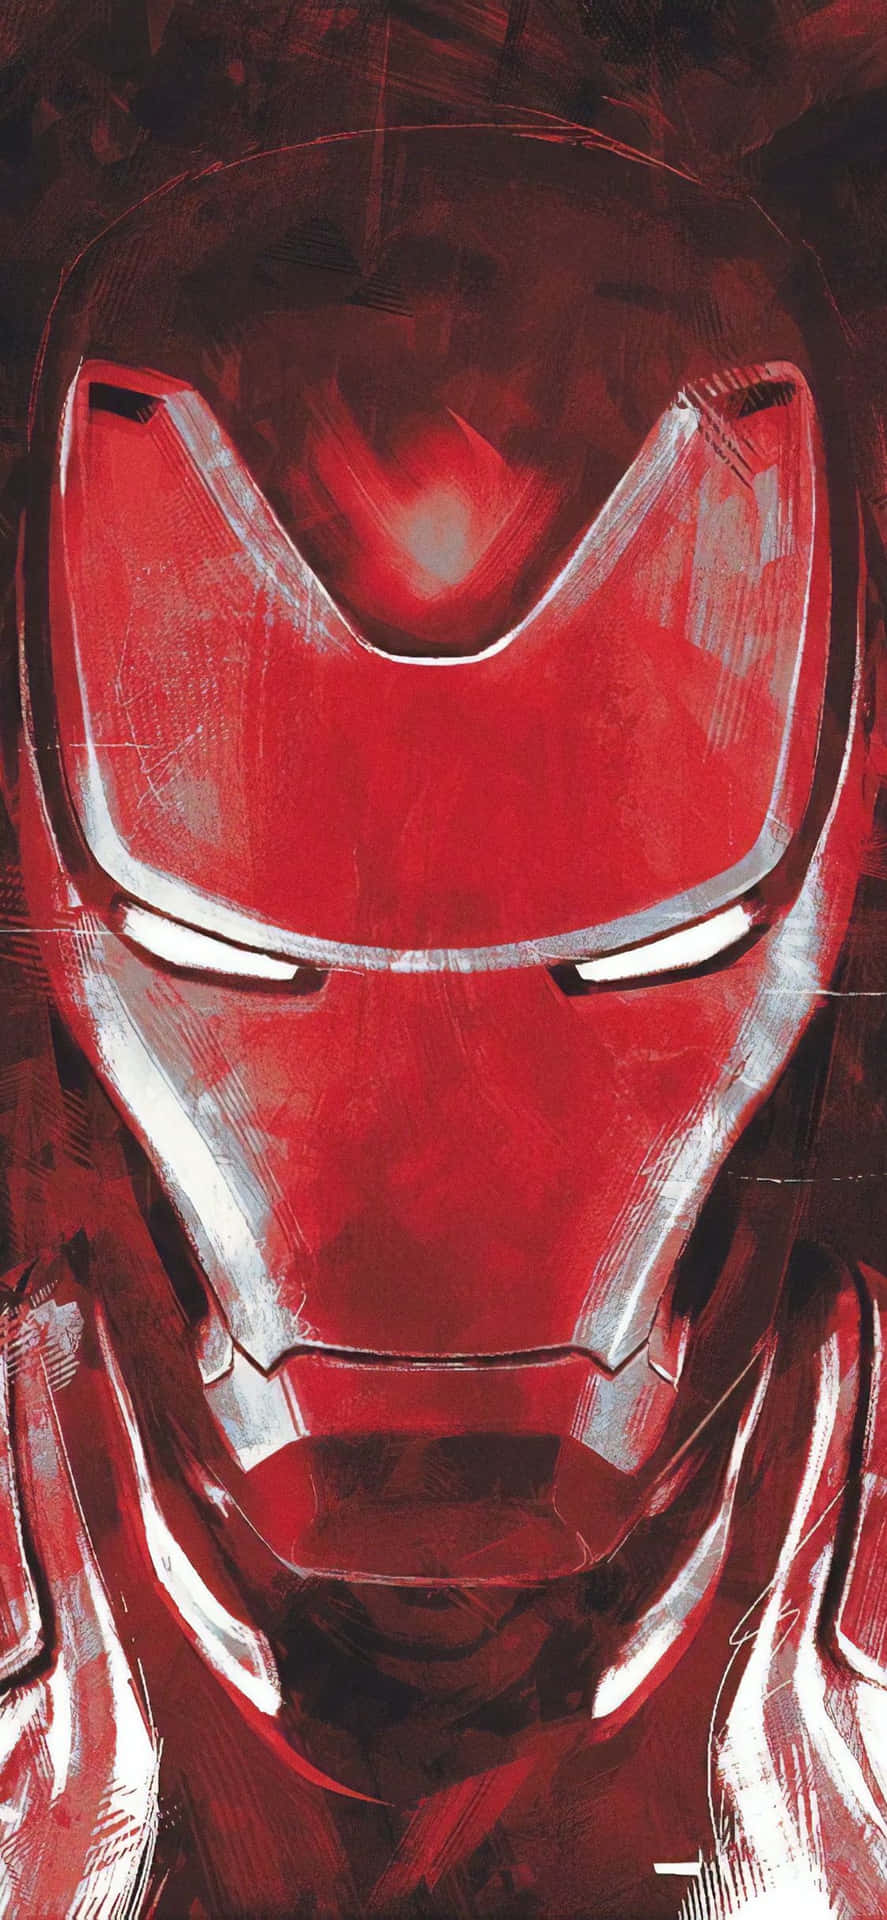 Iron Man Red Aesthetic For The IPhone X Wallpaper